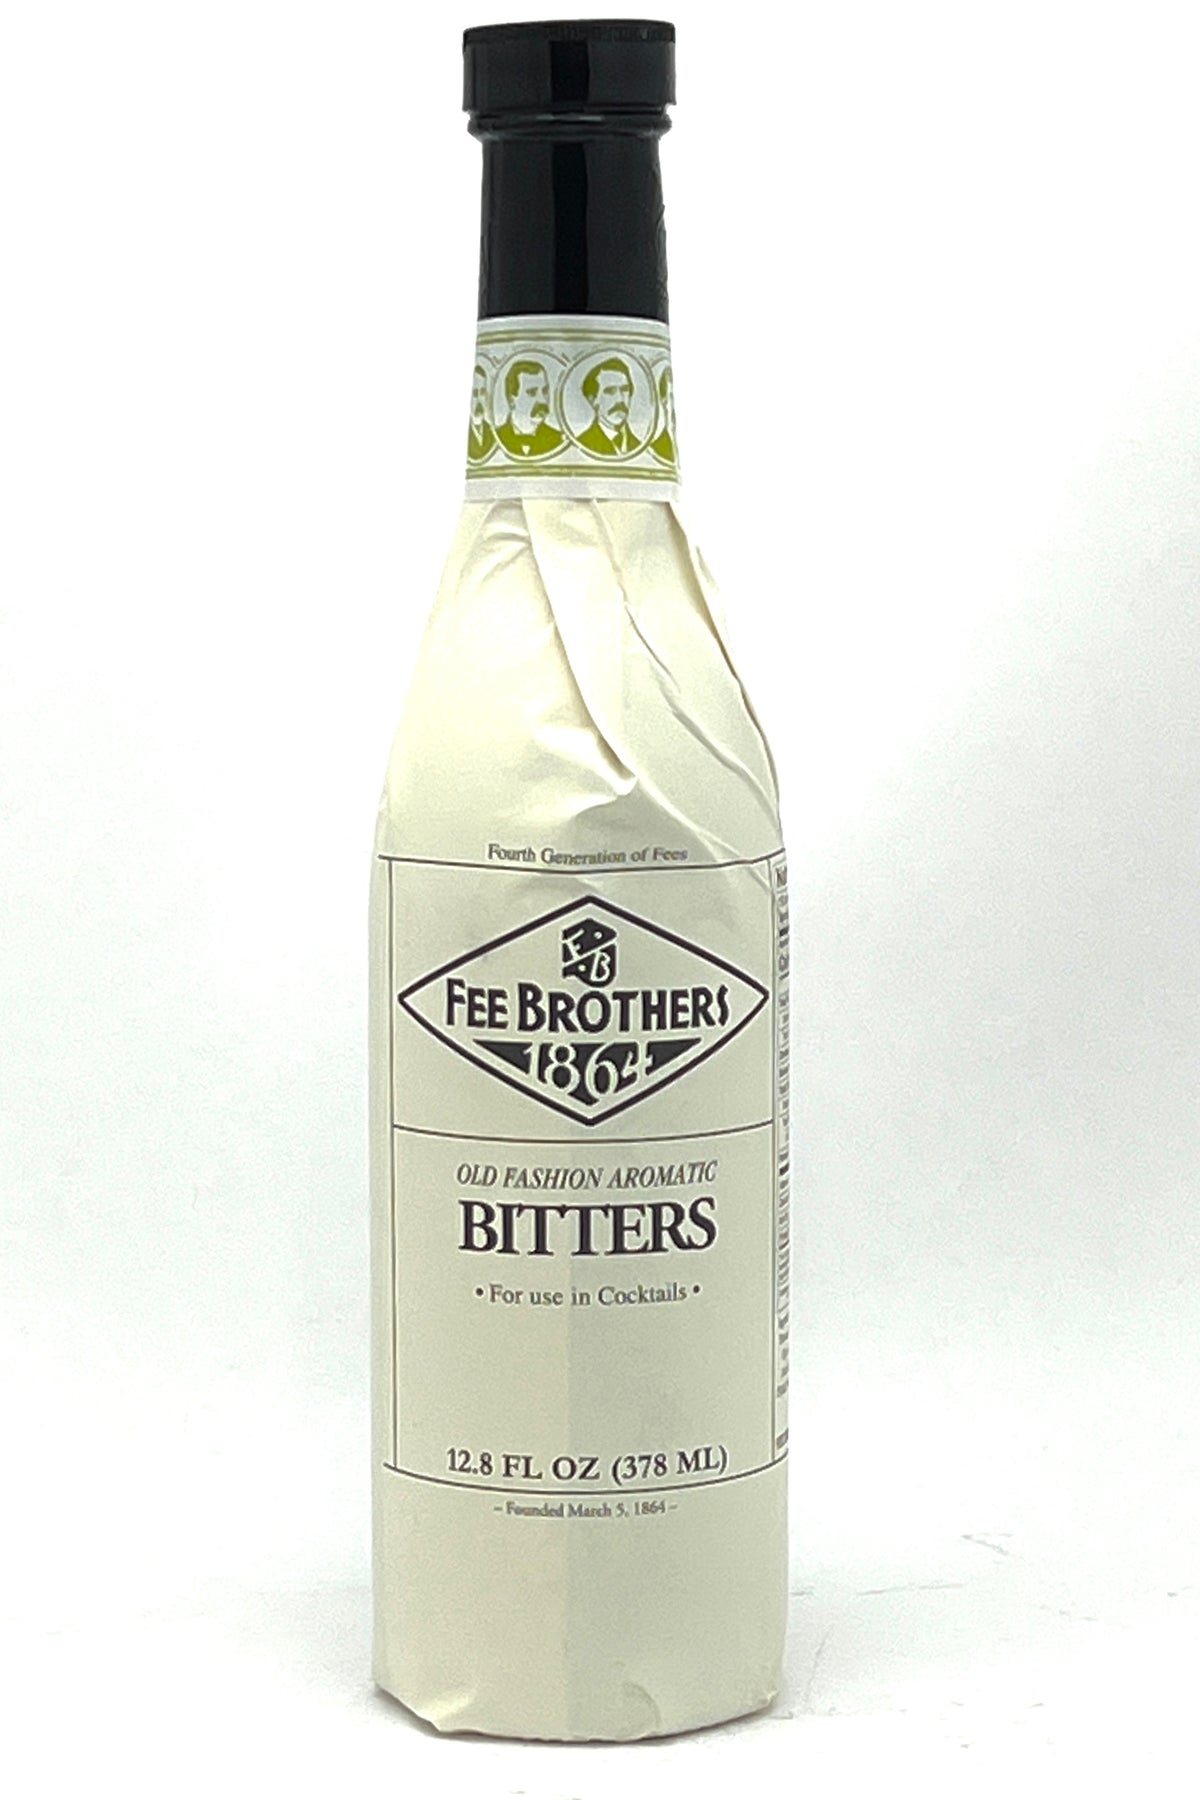 Fee Brothers Old Fashioned Aromatic Bitters 12.8 oz